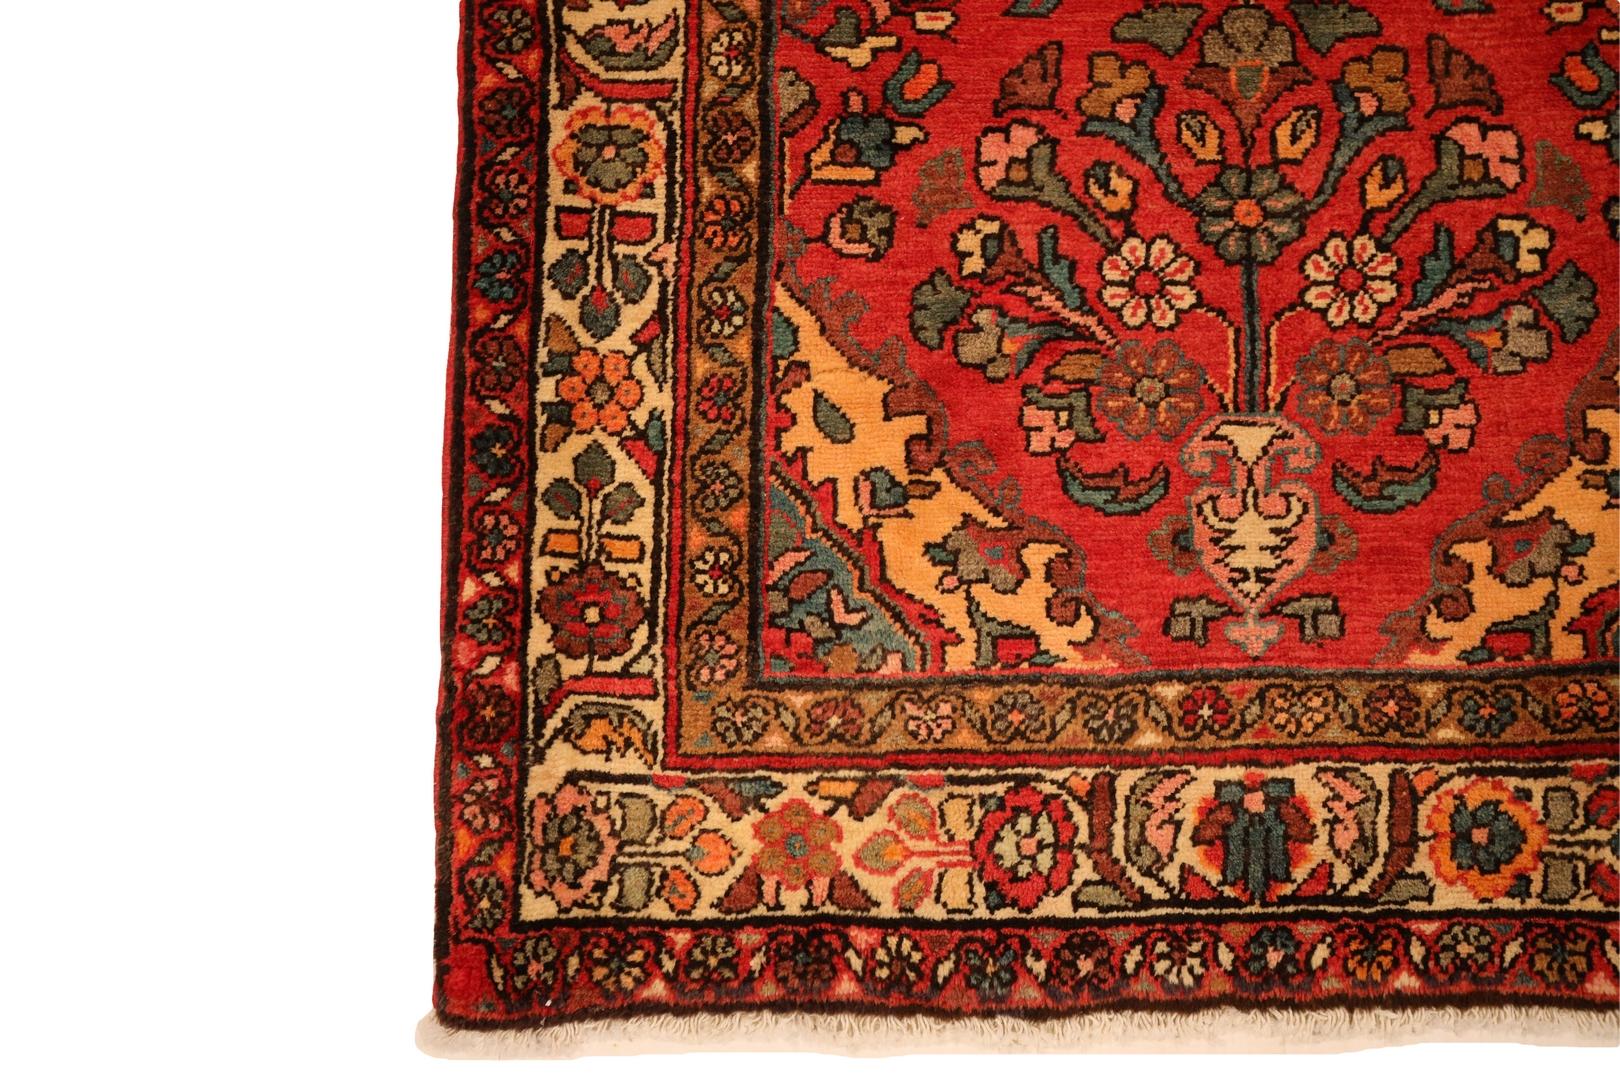 Introducing our captivating Hamadan Runner, a harmonious blend of traditional allure and timeless elegance. This exquisite rug boasts a radiant red background that forms the perfect backdrop for its artistic composition.

At the heart of this